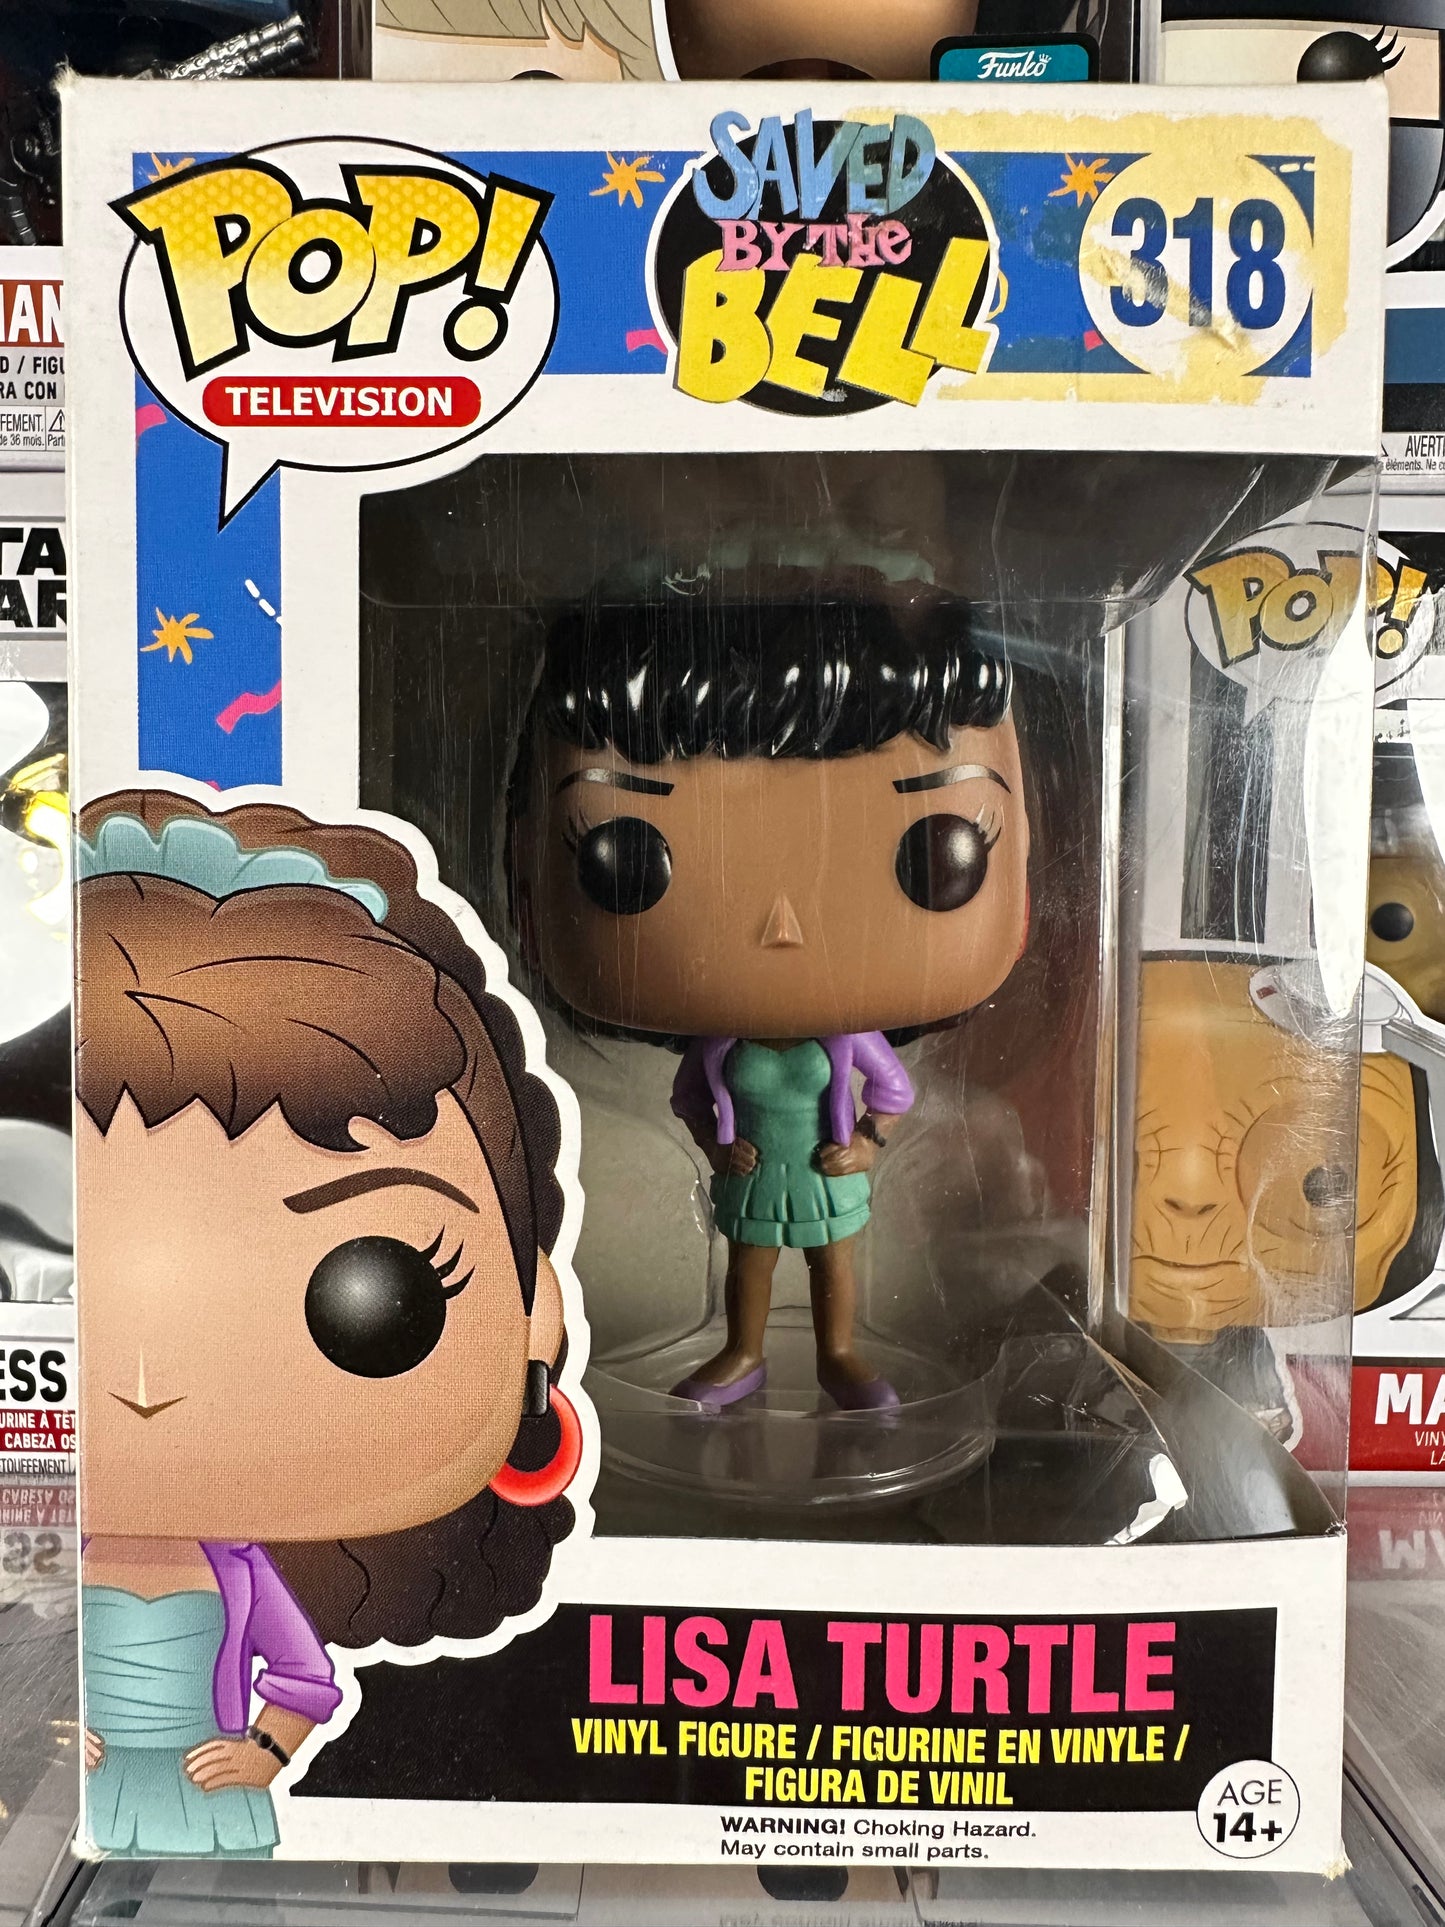 Saved By The Bell - Lisa Turtle (318) Vaulted